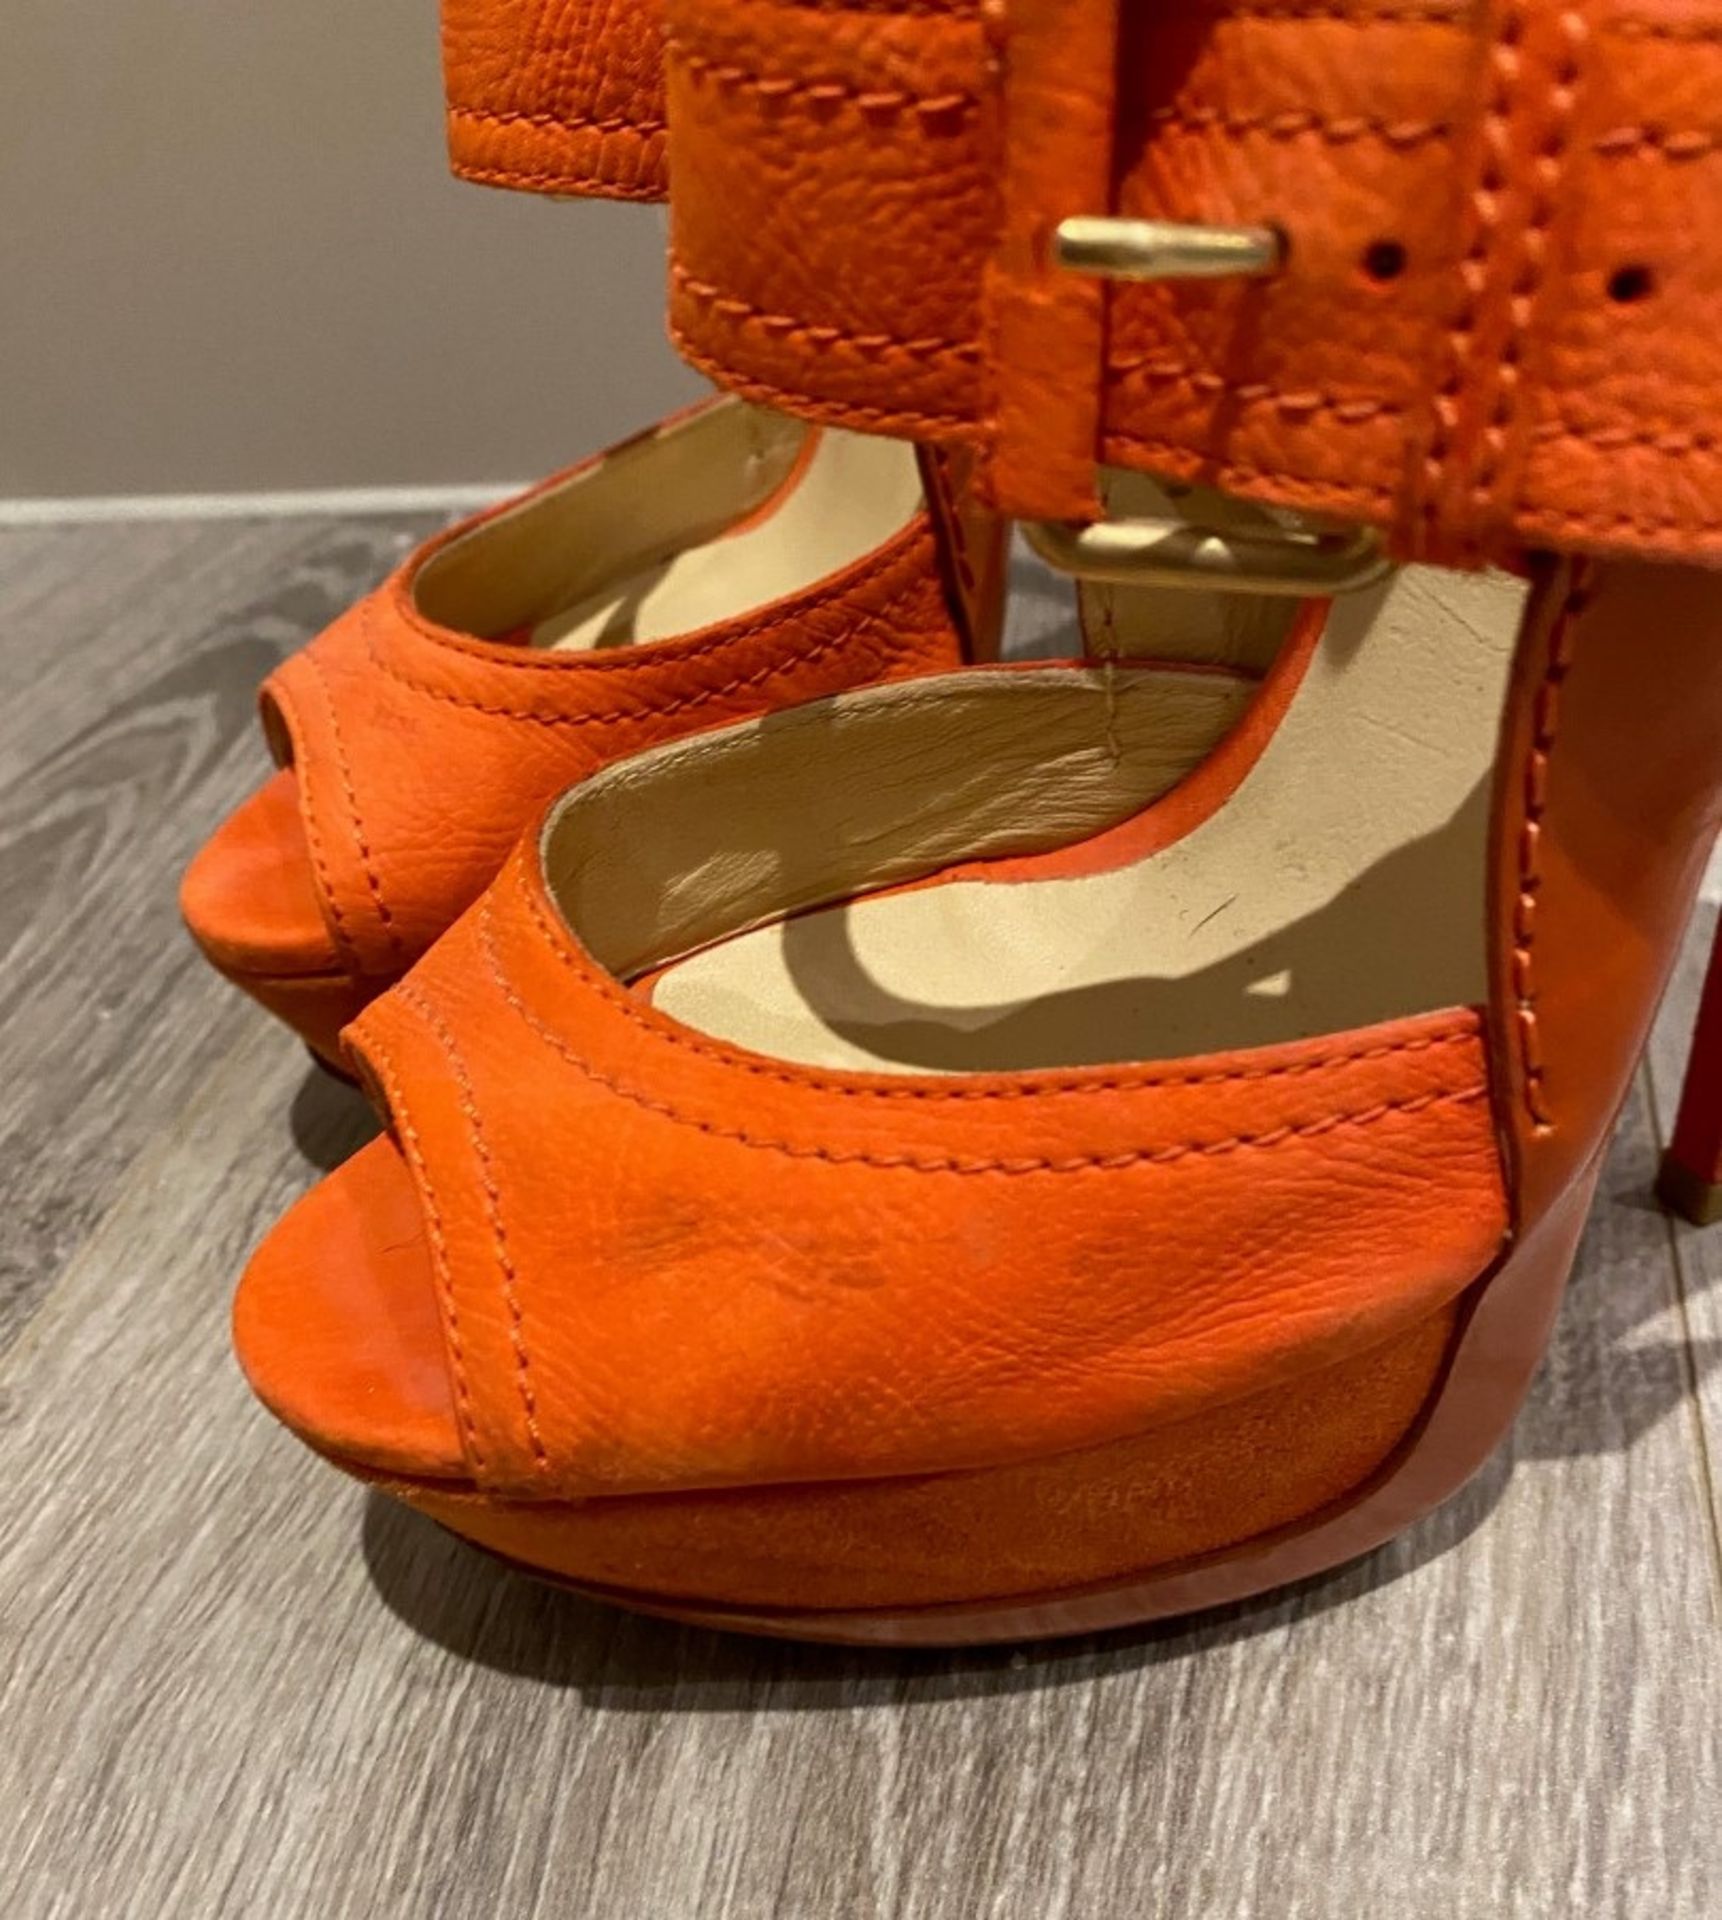 1 x Pair Of Genuine Jimmy Choo High Heel Shoes In Orange - Size: 36 - Preowned in Good Condition - R - Image 2 of 5